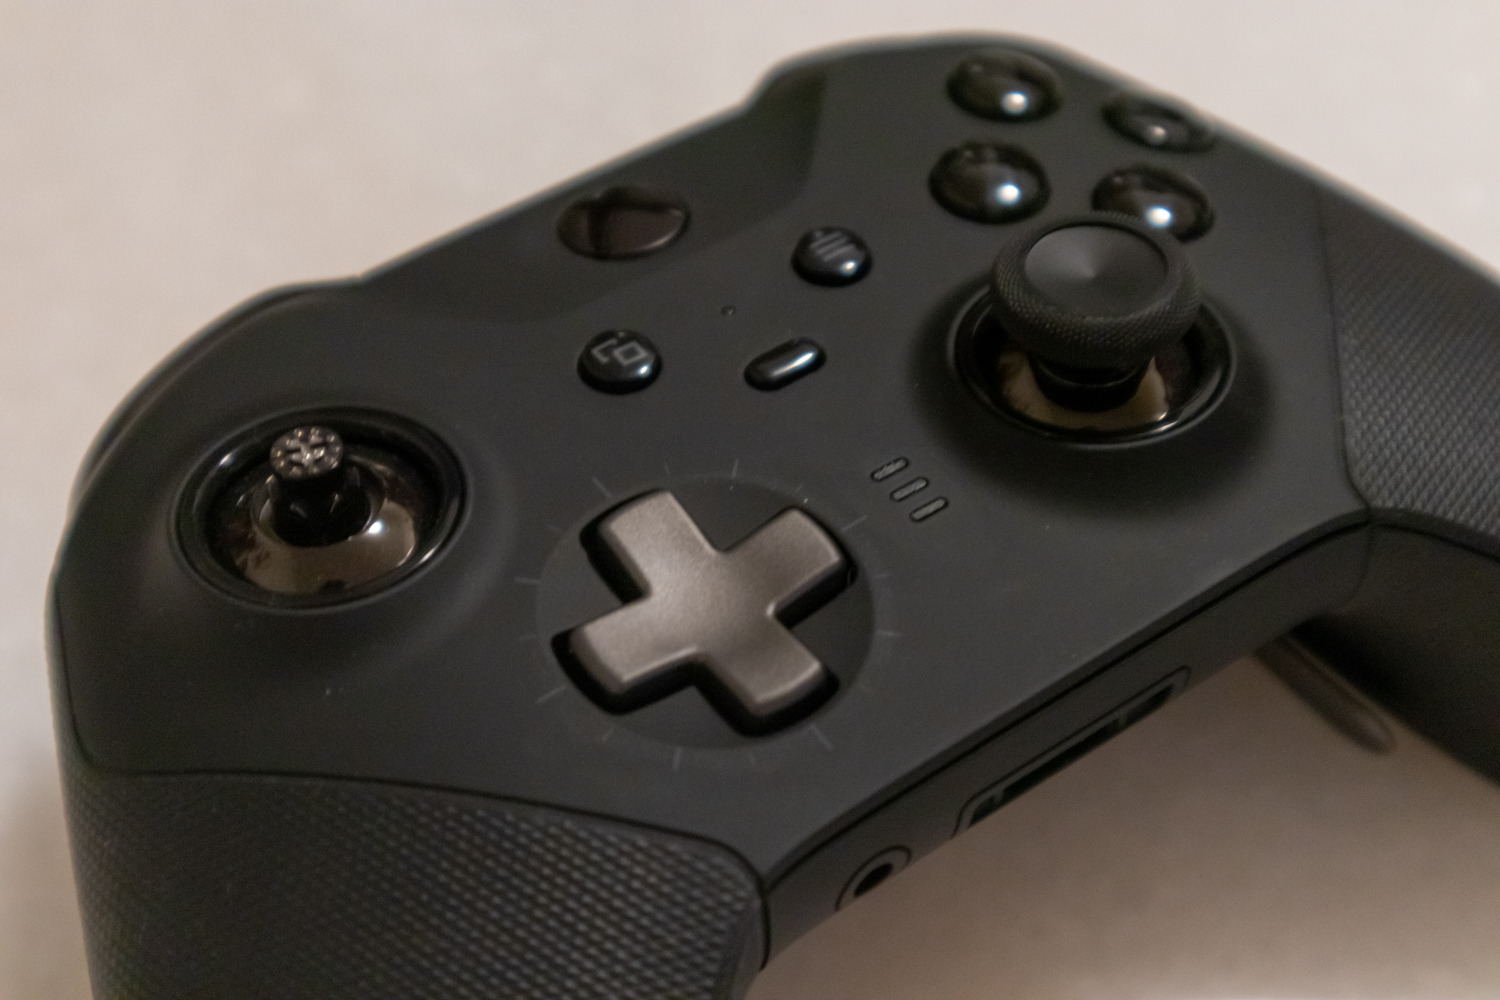 Microsoft Xbox Elite Wireless Controller Review: One of the Best